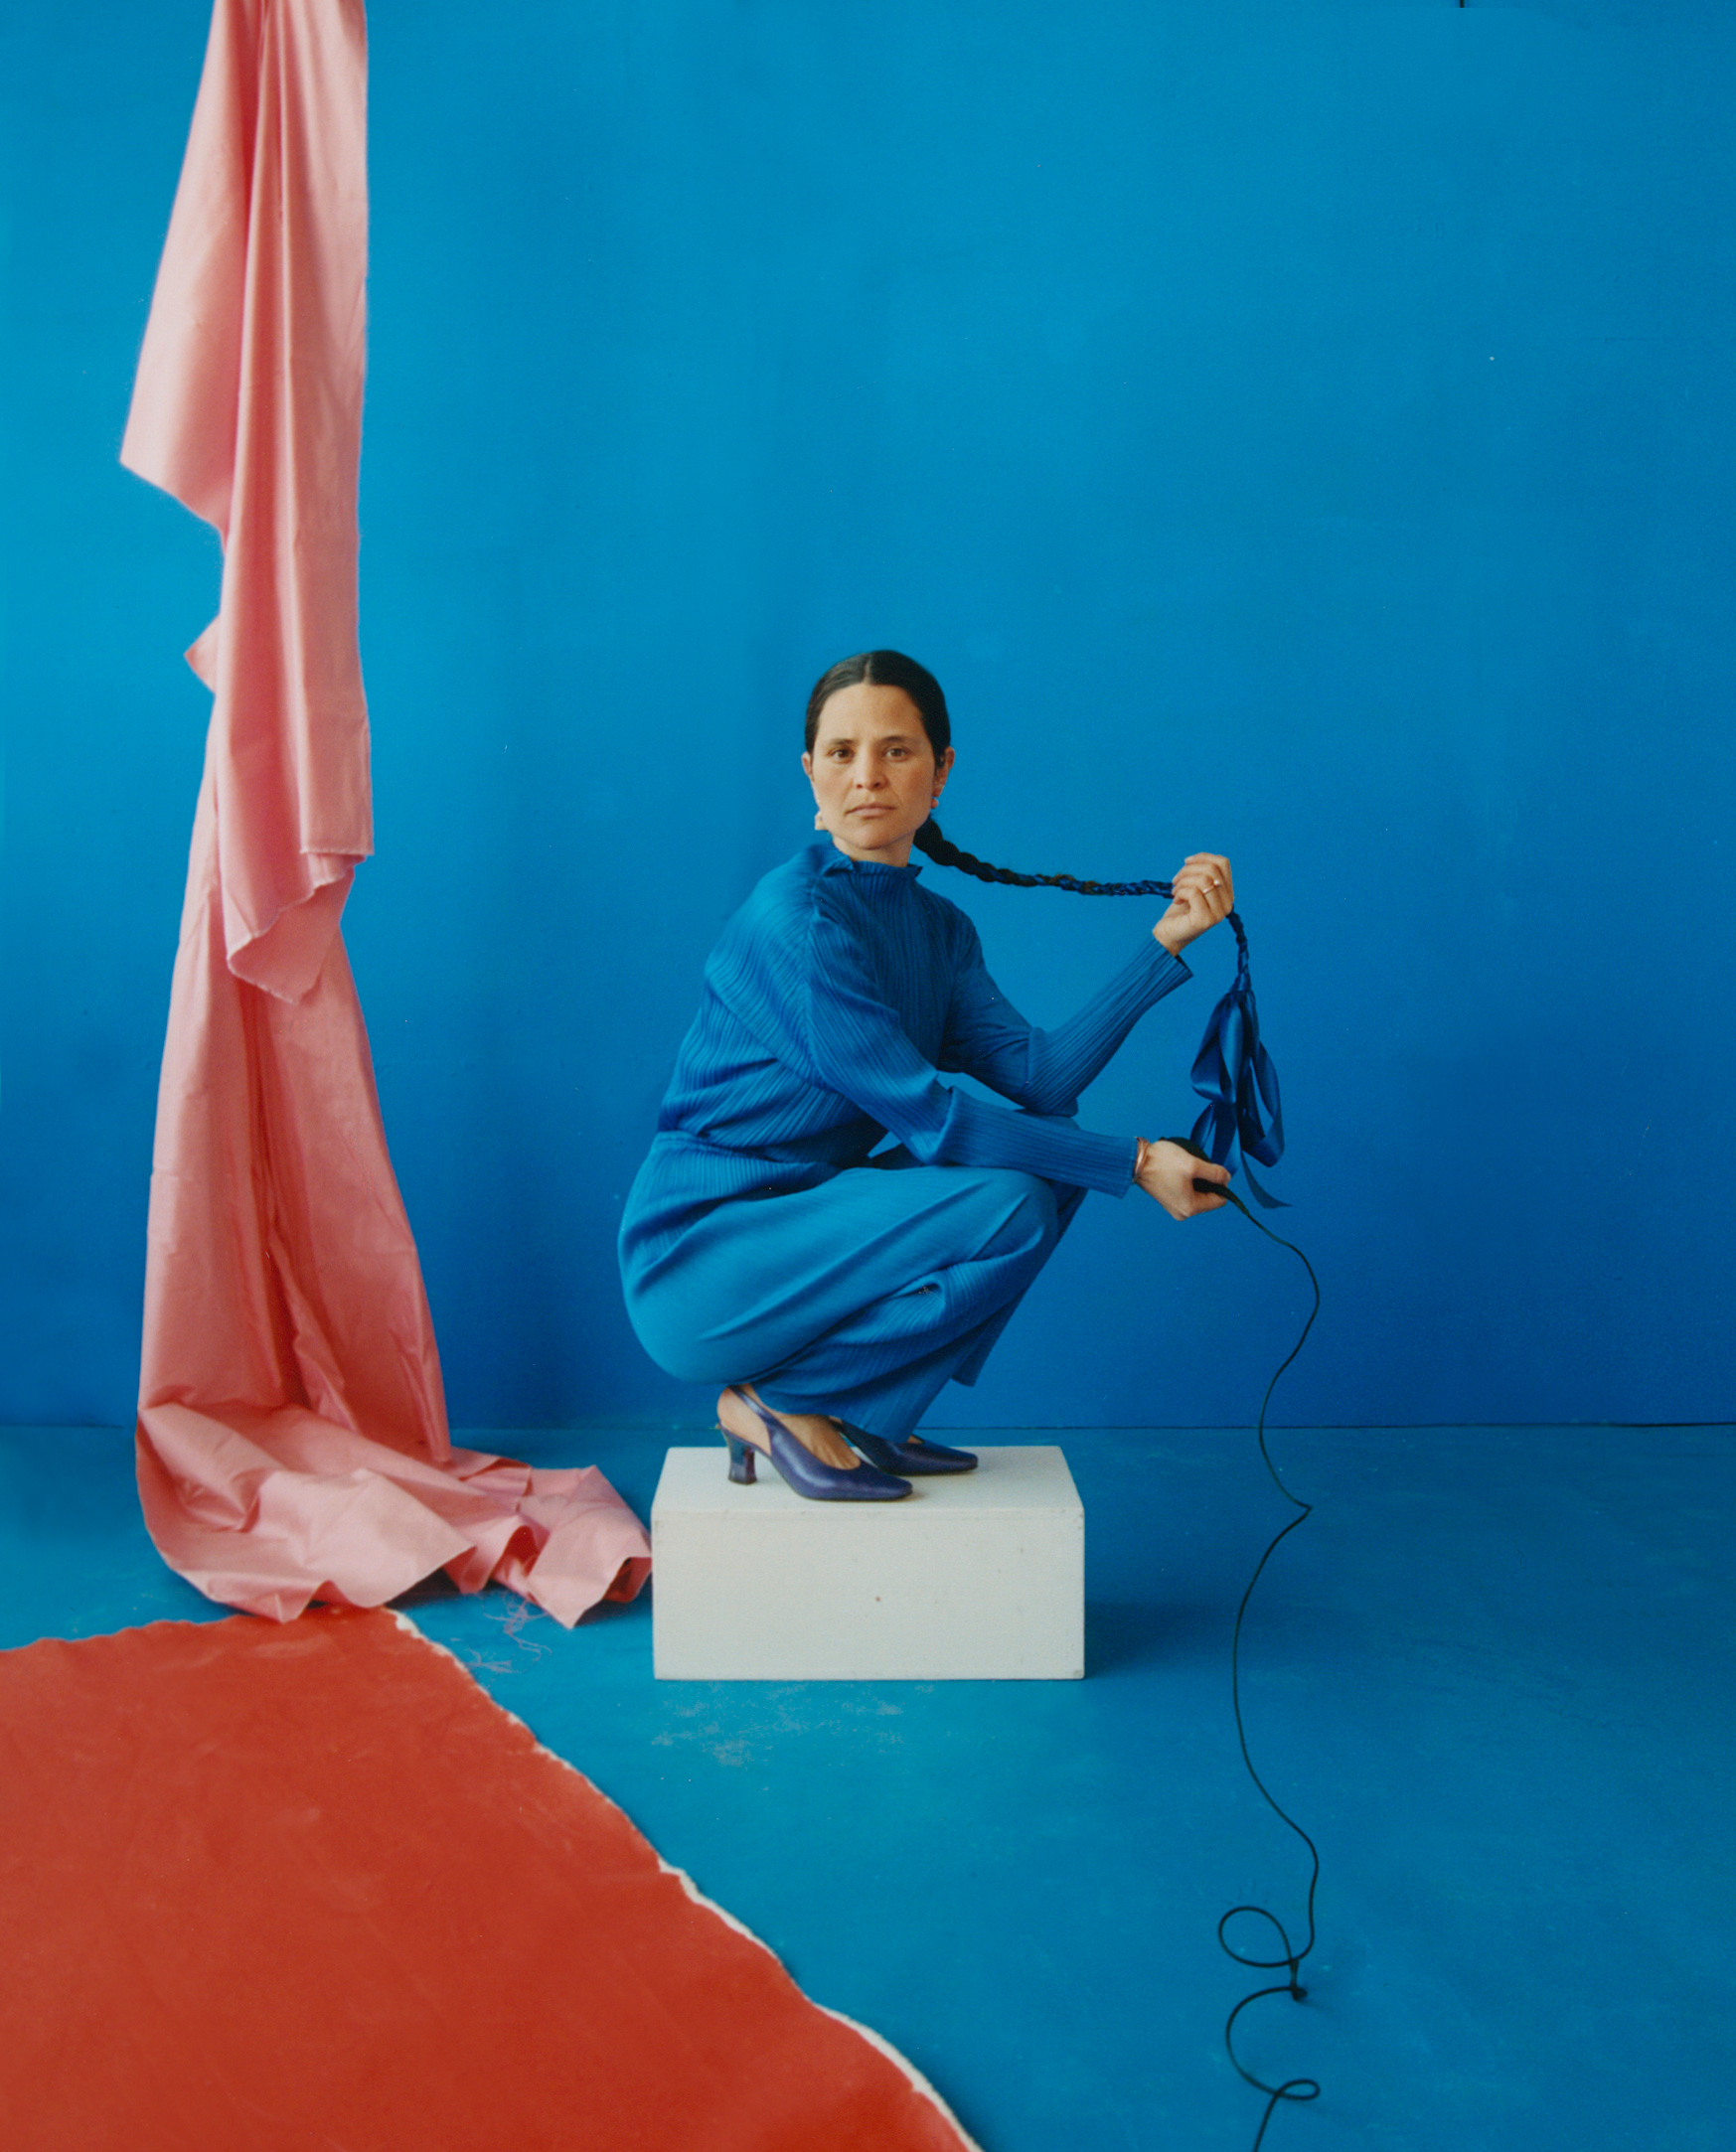 Portrait of Camila Falquez crouching on a white apple box, wearing a long blue gown, holding her braided hair in her hand. The background is blue with a red fabric draped in the left portion of the frame.